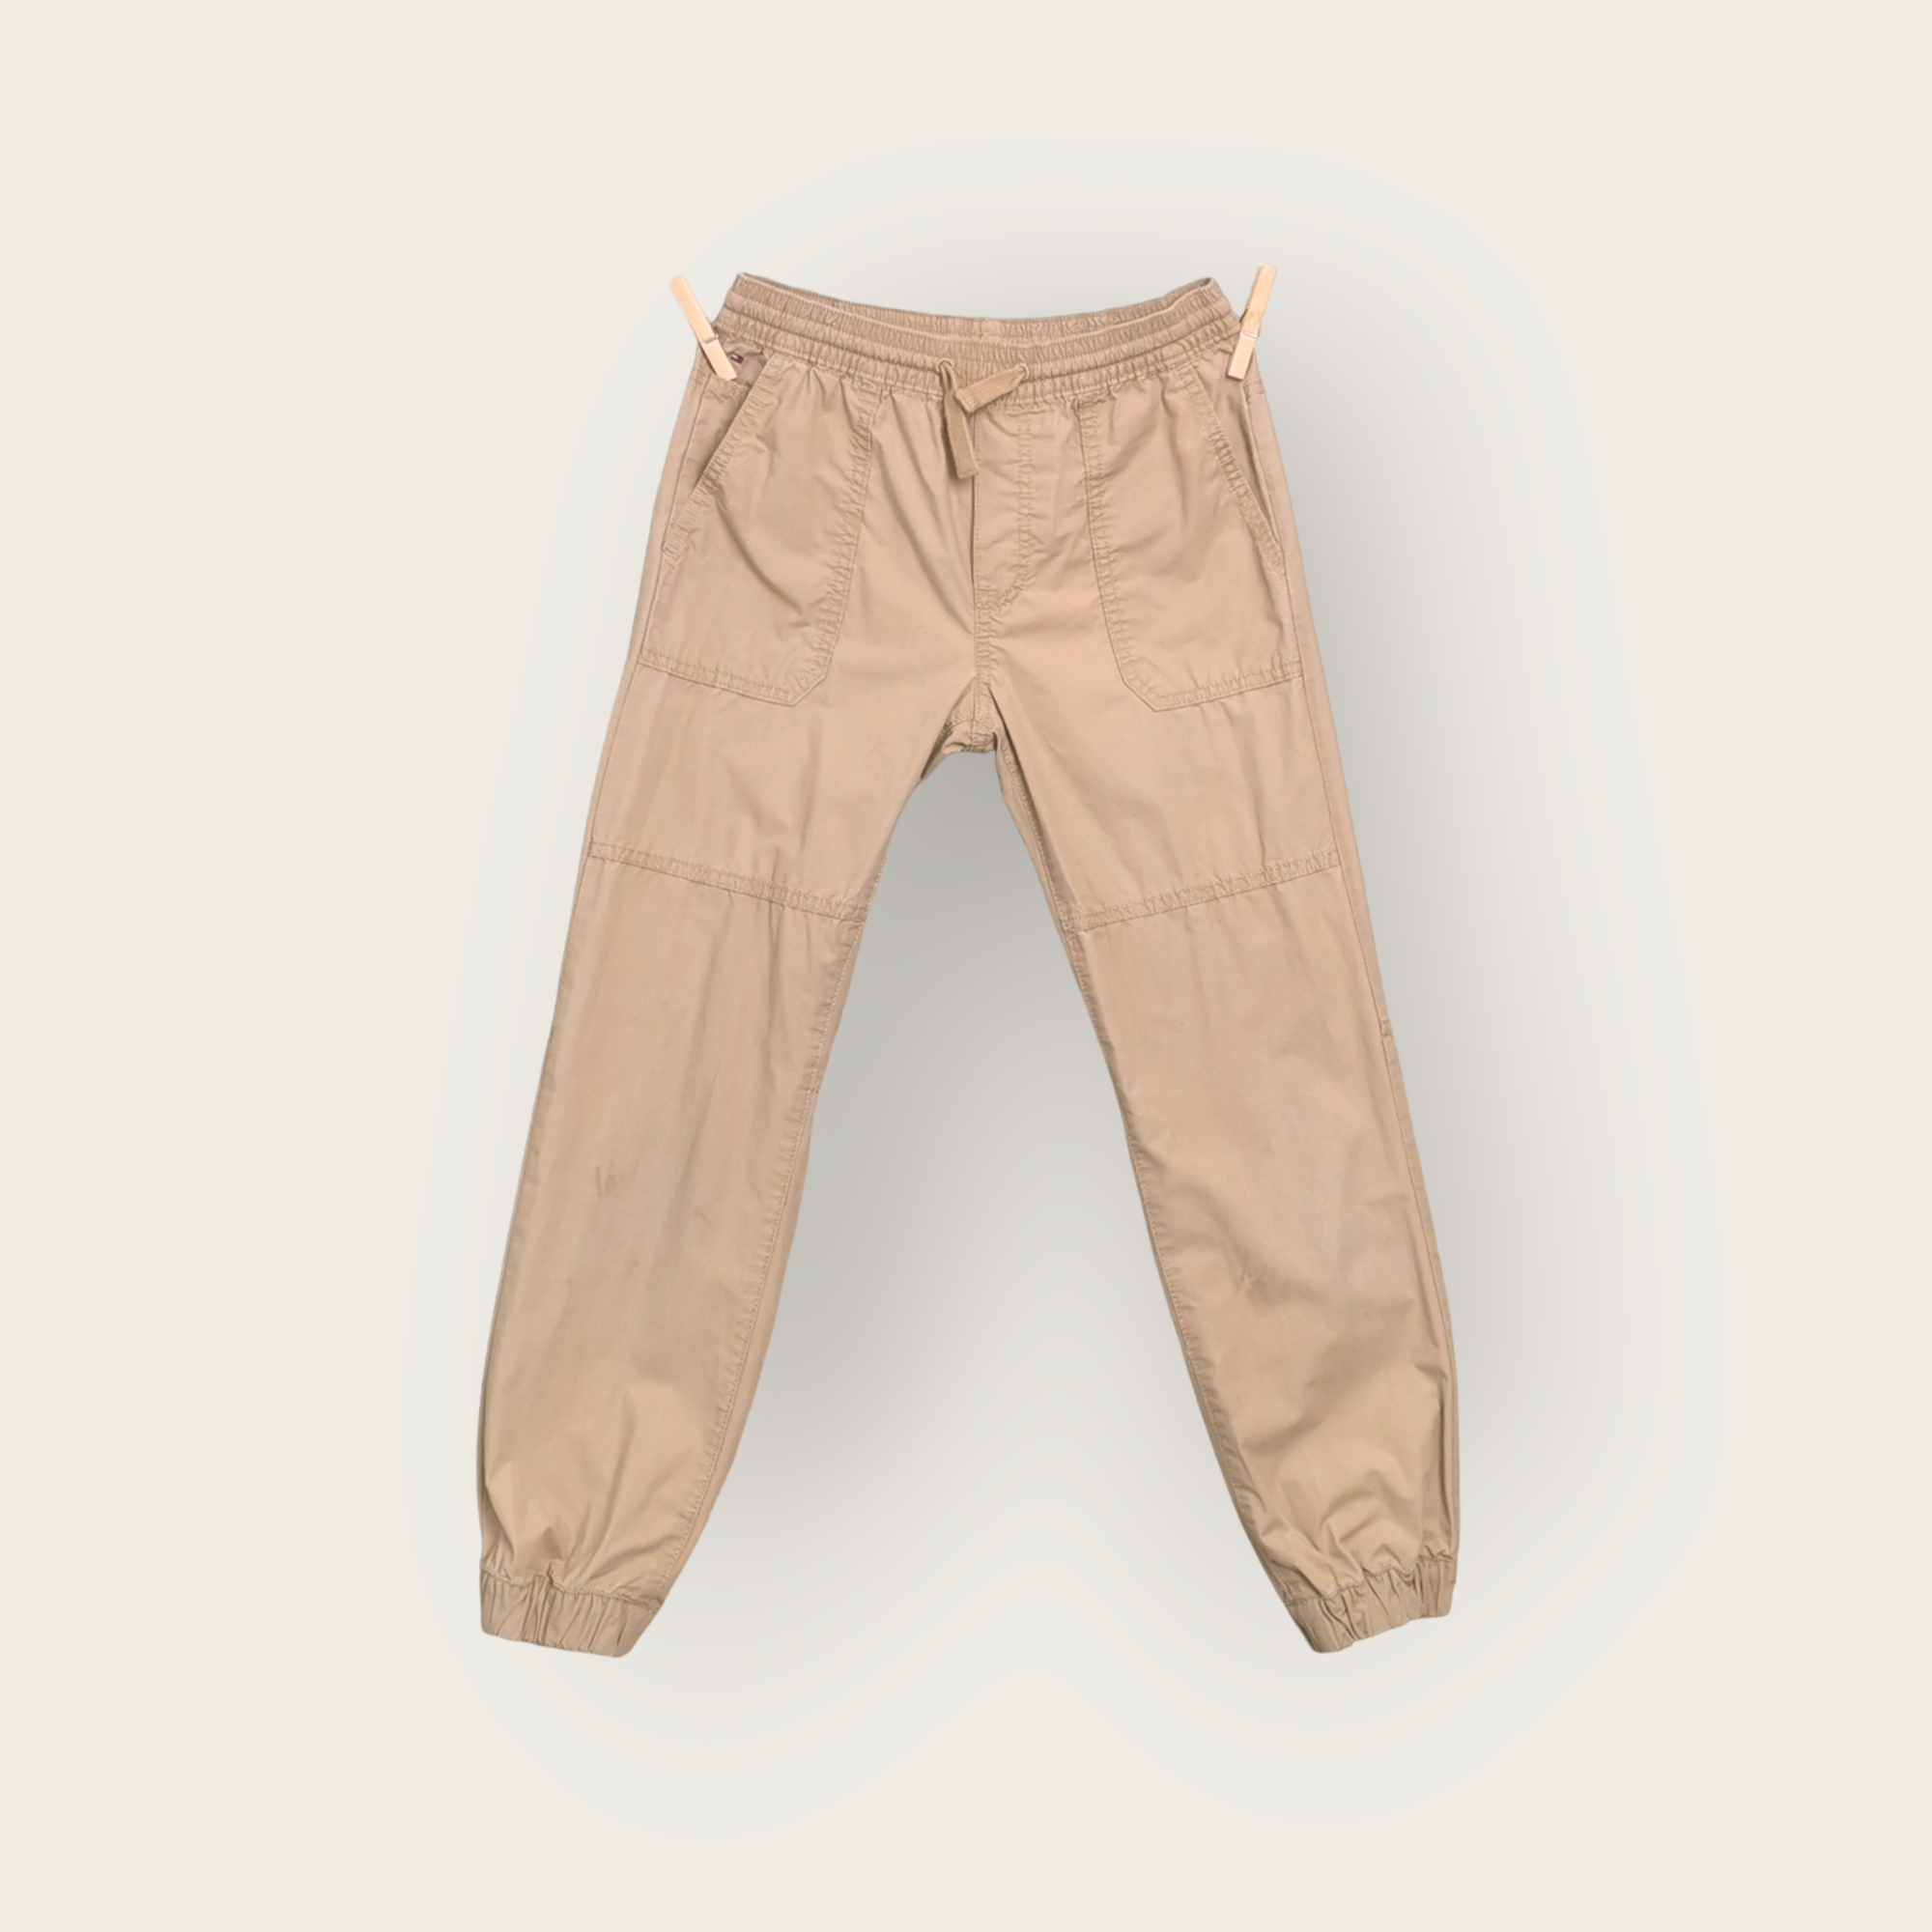 BOY SIZE 12 YEARS - TOMMY HILFIGER, Cream Cargo Pants VGUC B48 – Faith and  Love Thrift